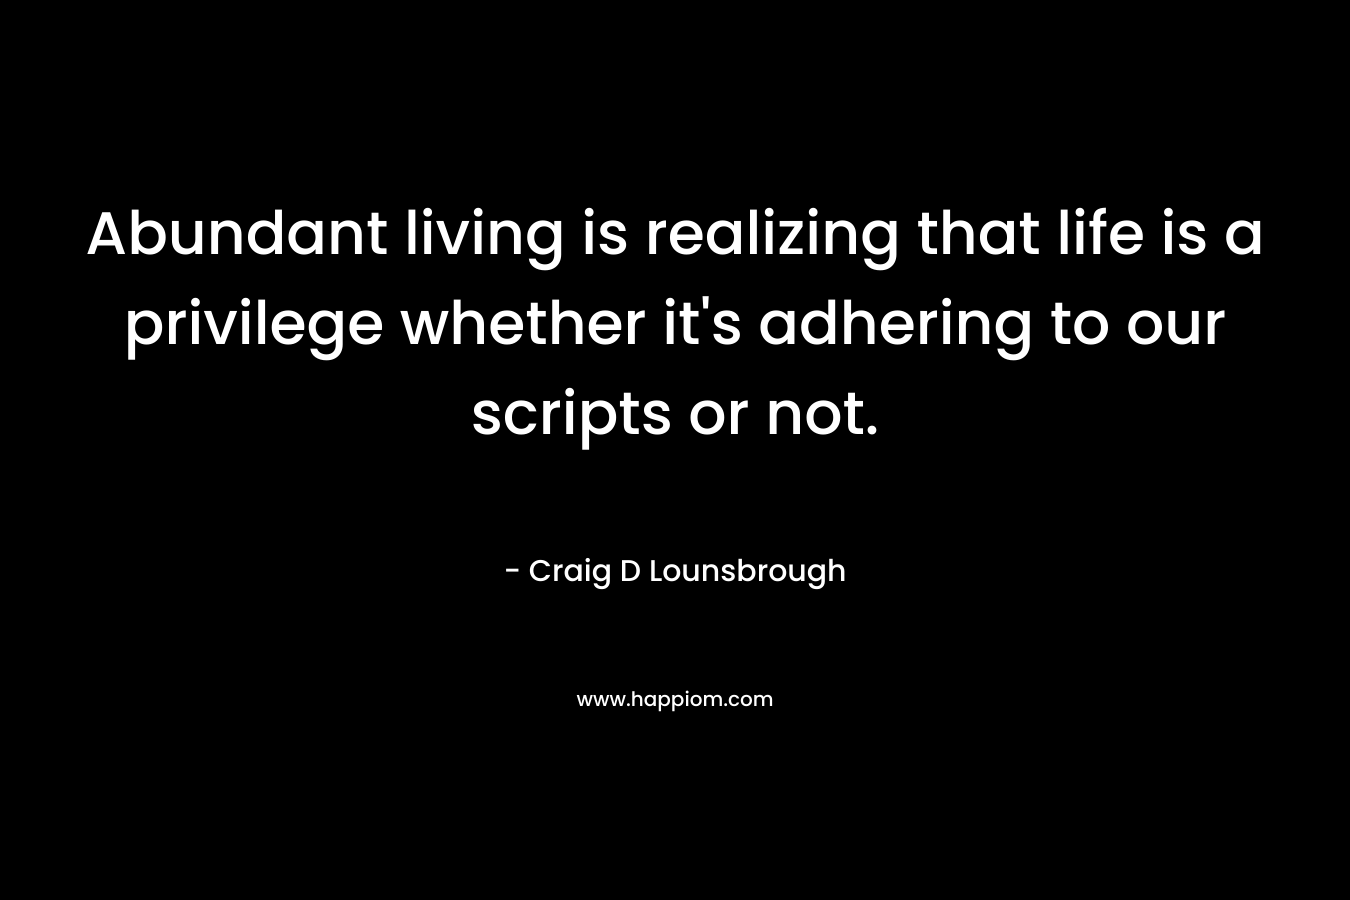 Abundant living is realizing that life is a privilege whether it’s adhering to our scripts or not. – Craig D Lounsbrough